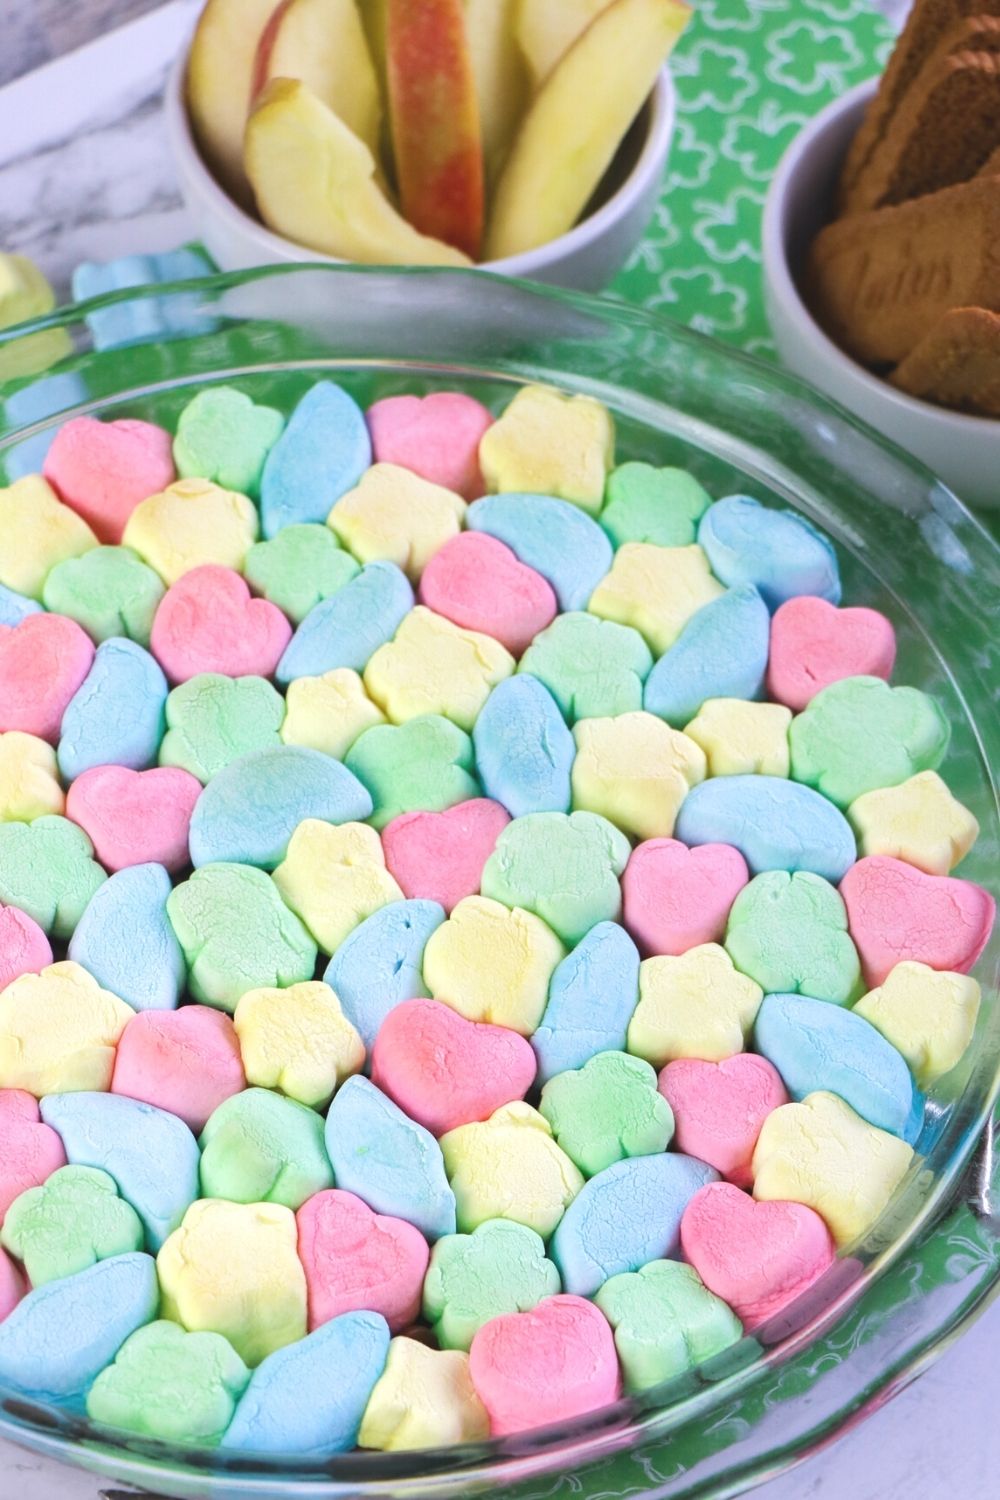 marshmallows puffed up from baking the Lucky Charms smores dip